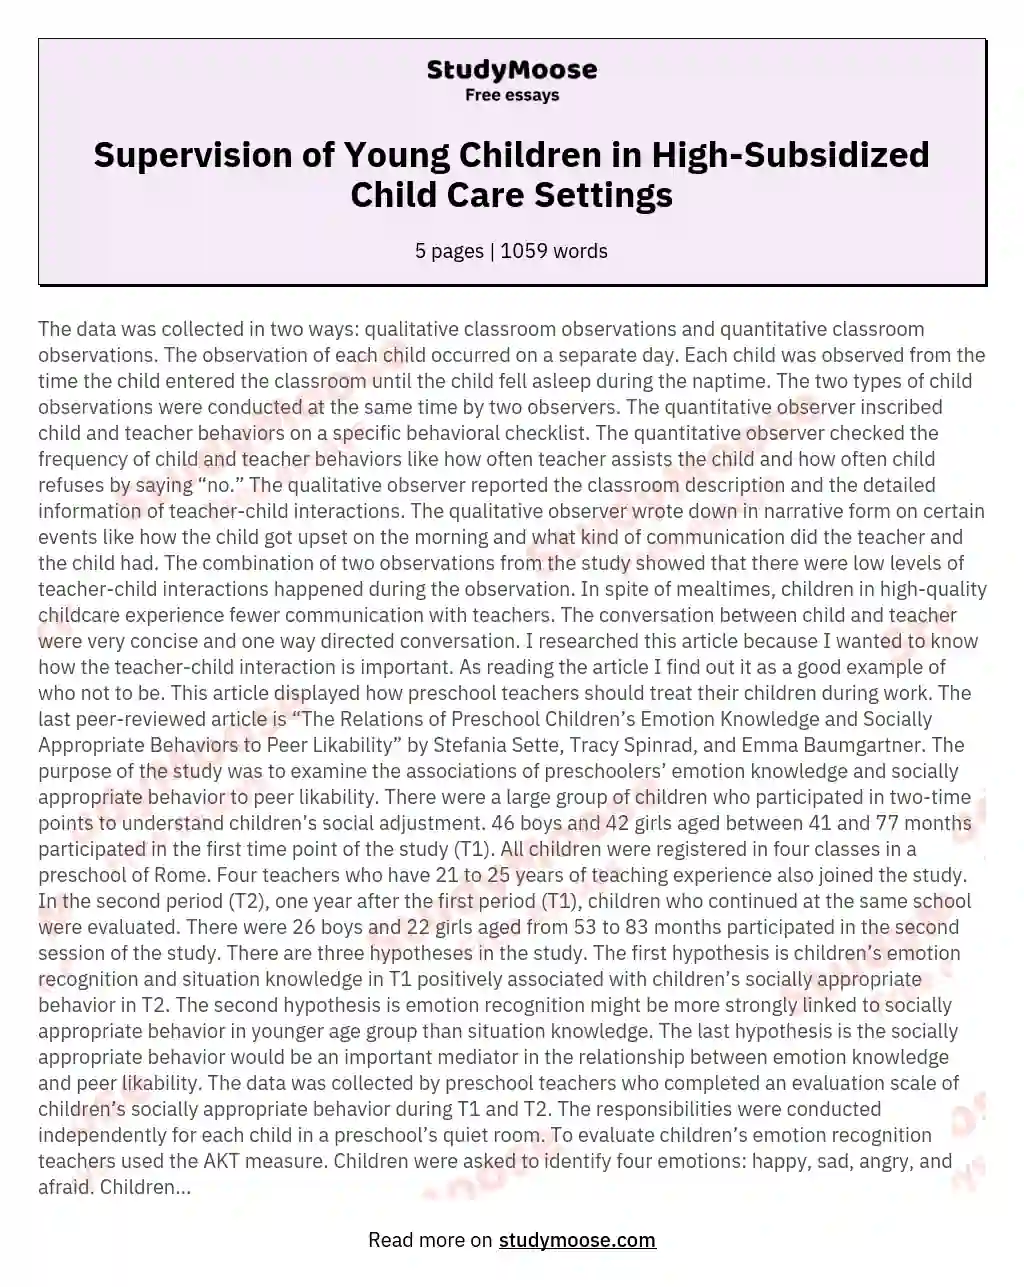 Supervision of Young Children in High-Subsidized Child Care Settings essay